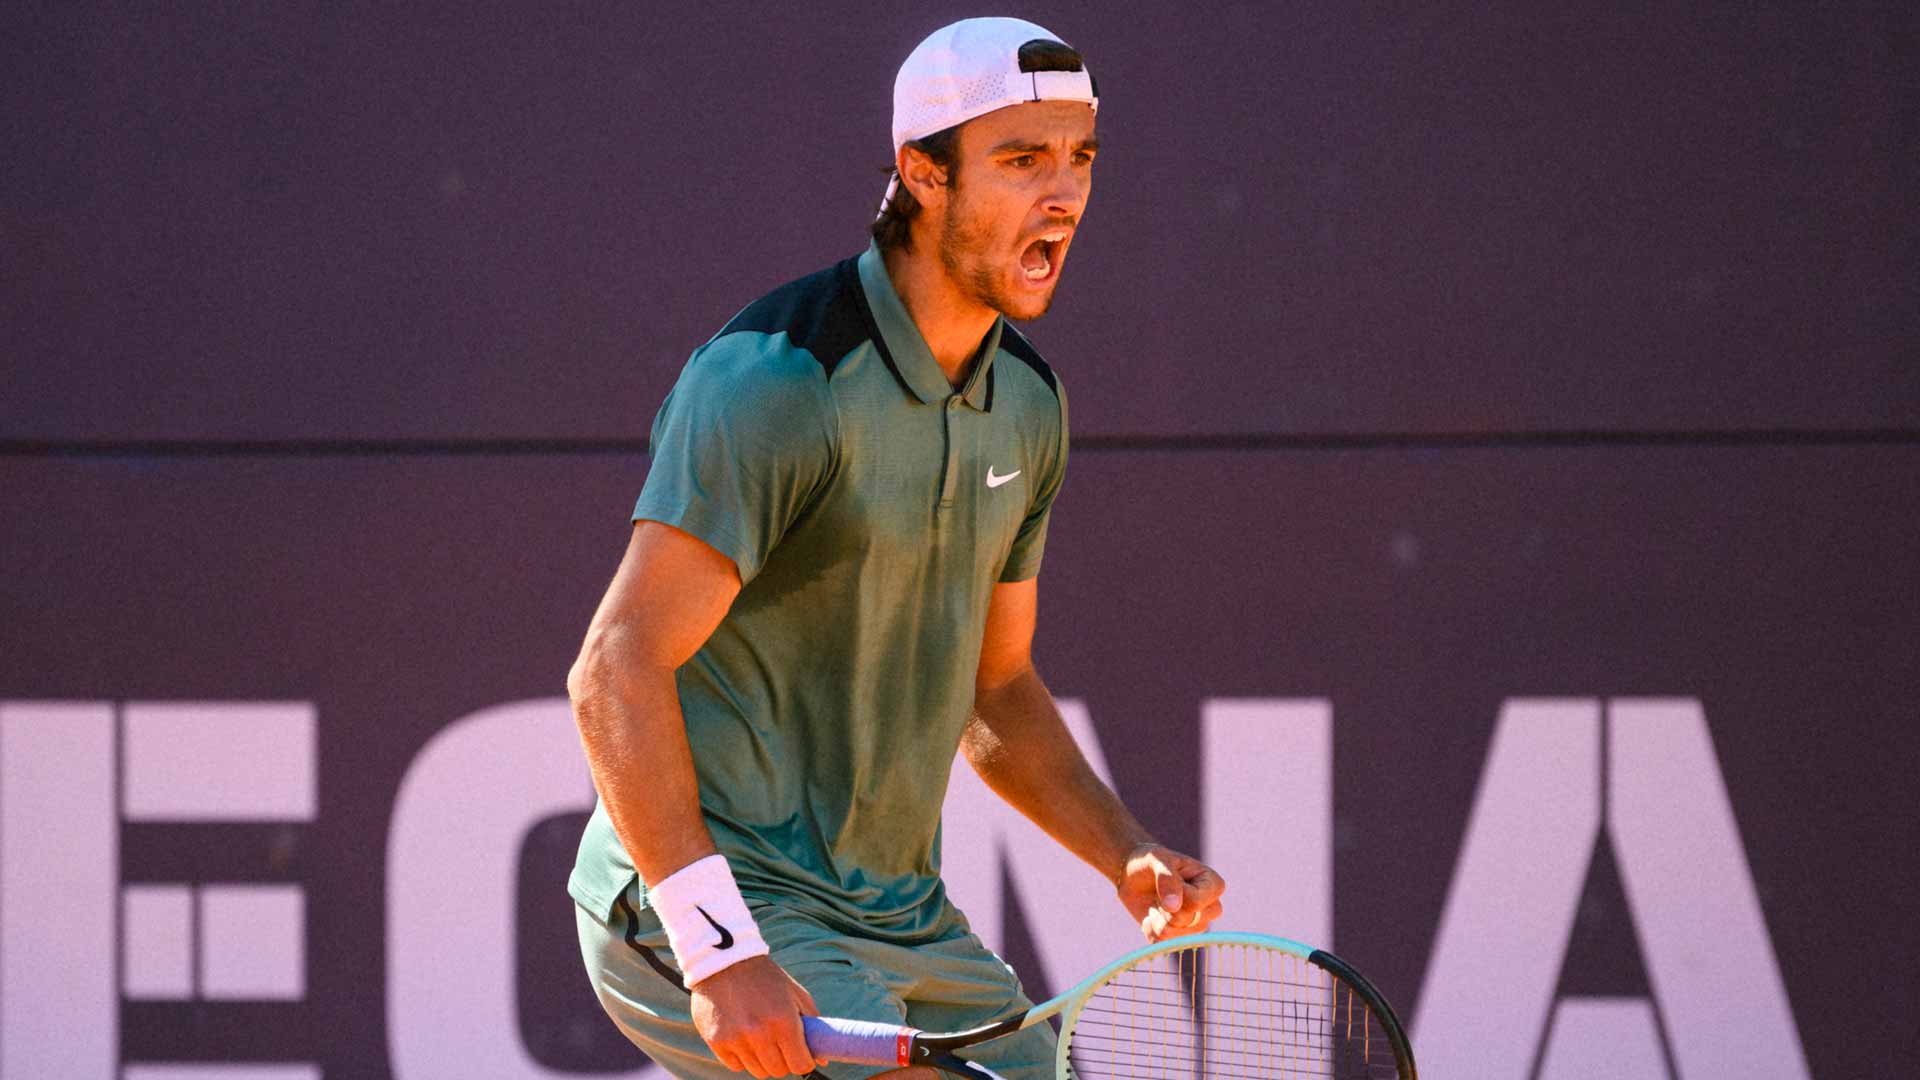 Lorenzo Musetti recovers from a set and break down to advance at the Sardegna Open.